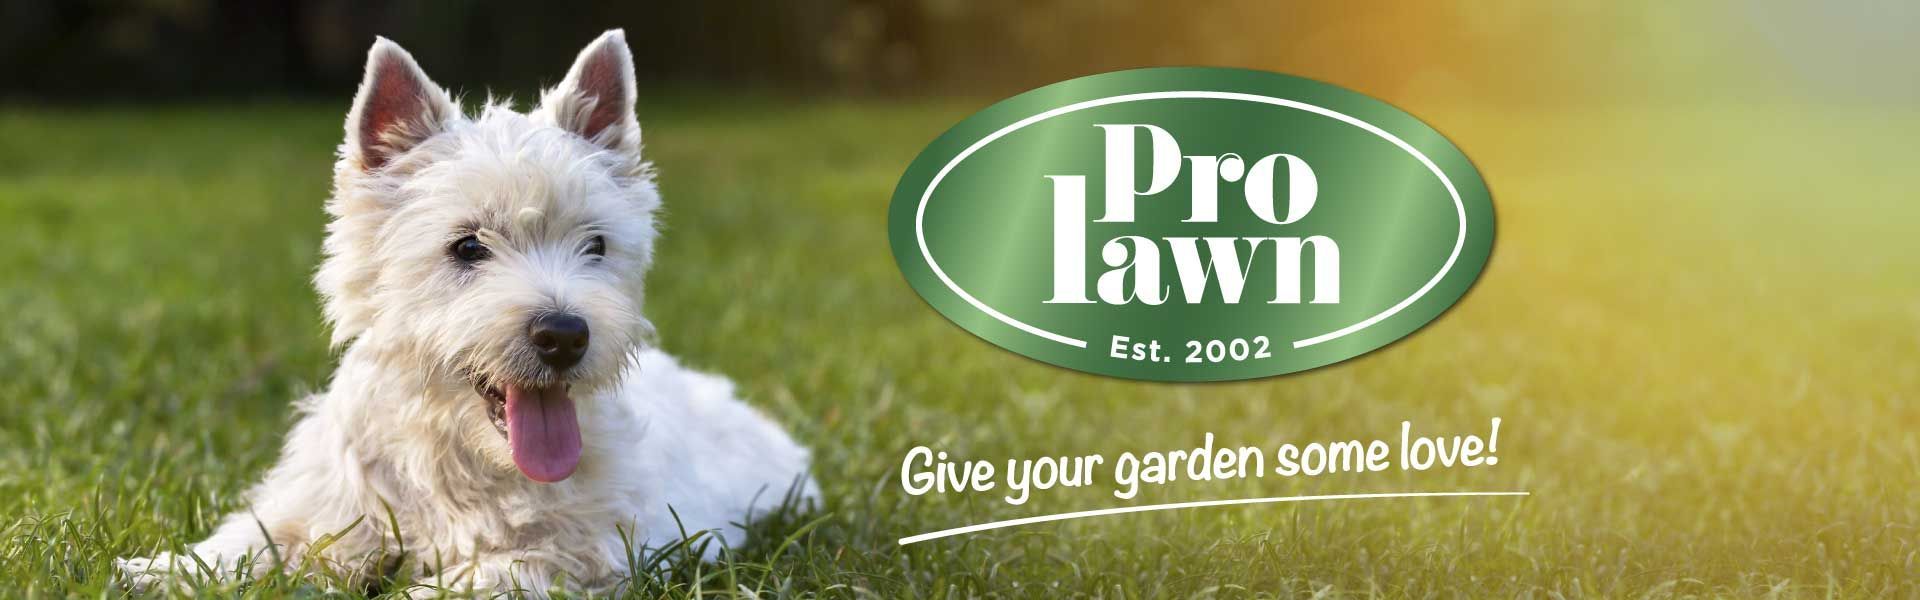 Prolawn Facebook Header with small white dog lying on the grass next logo